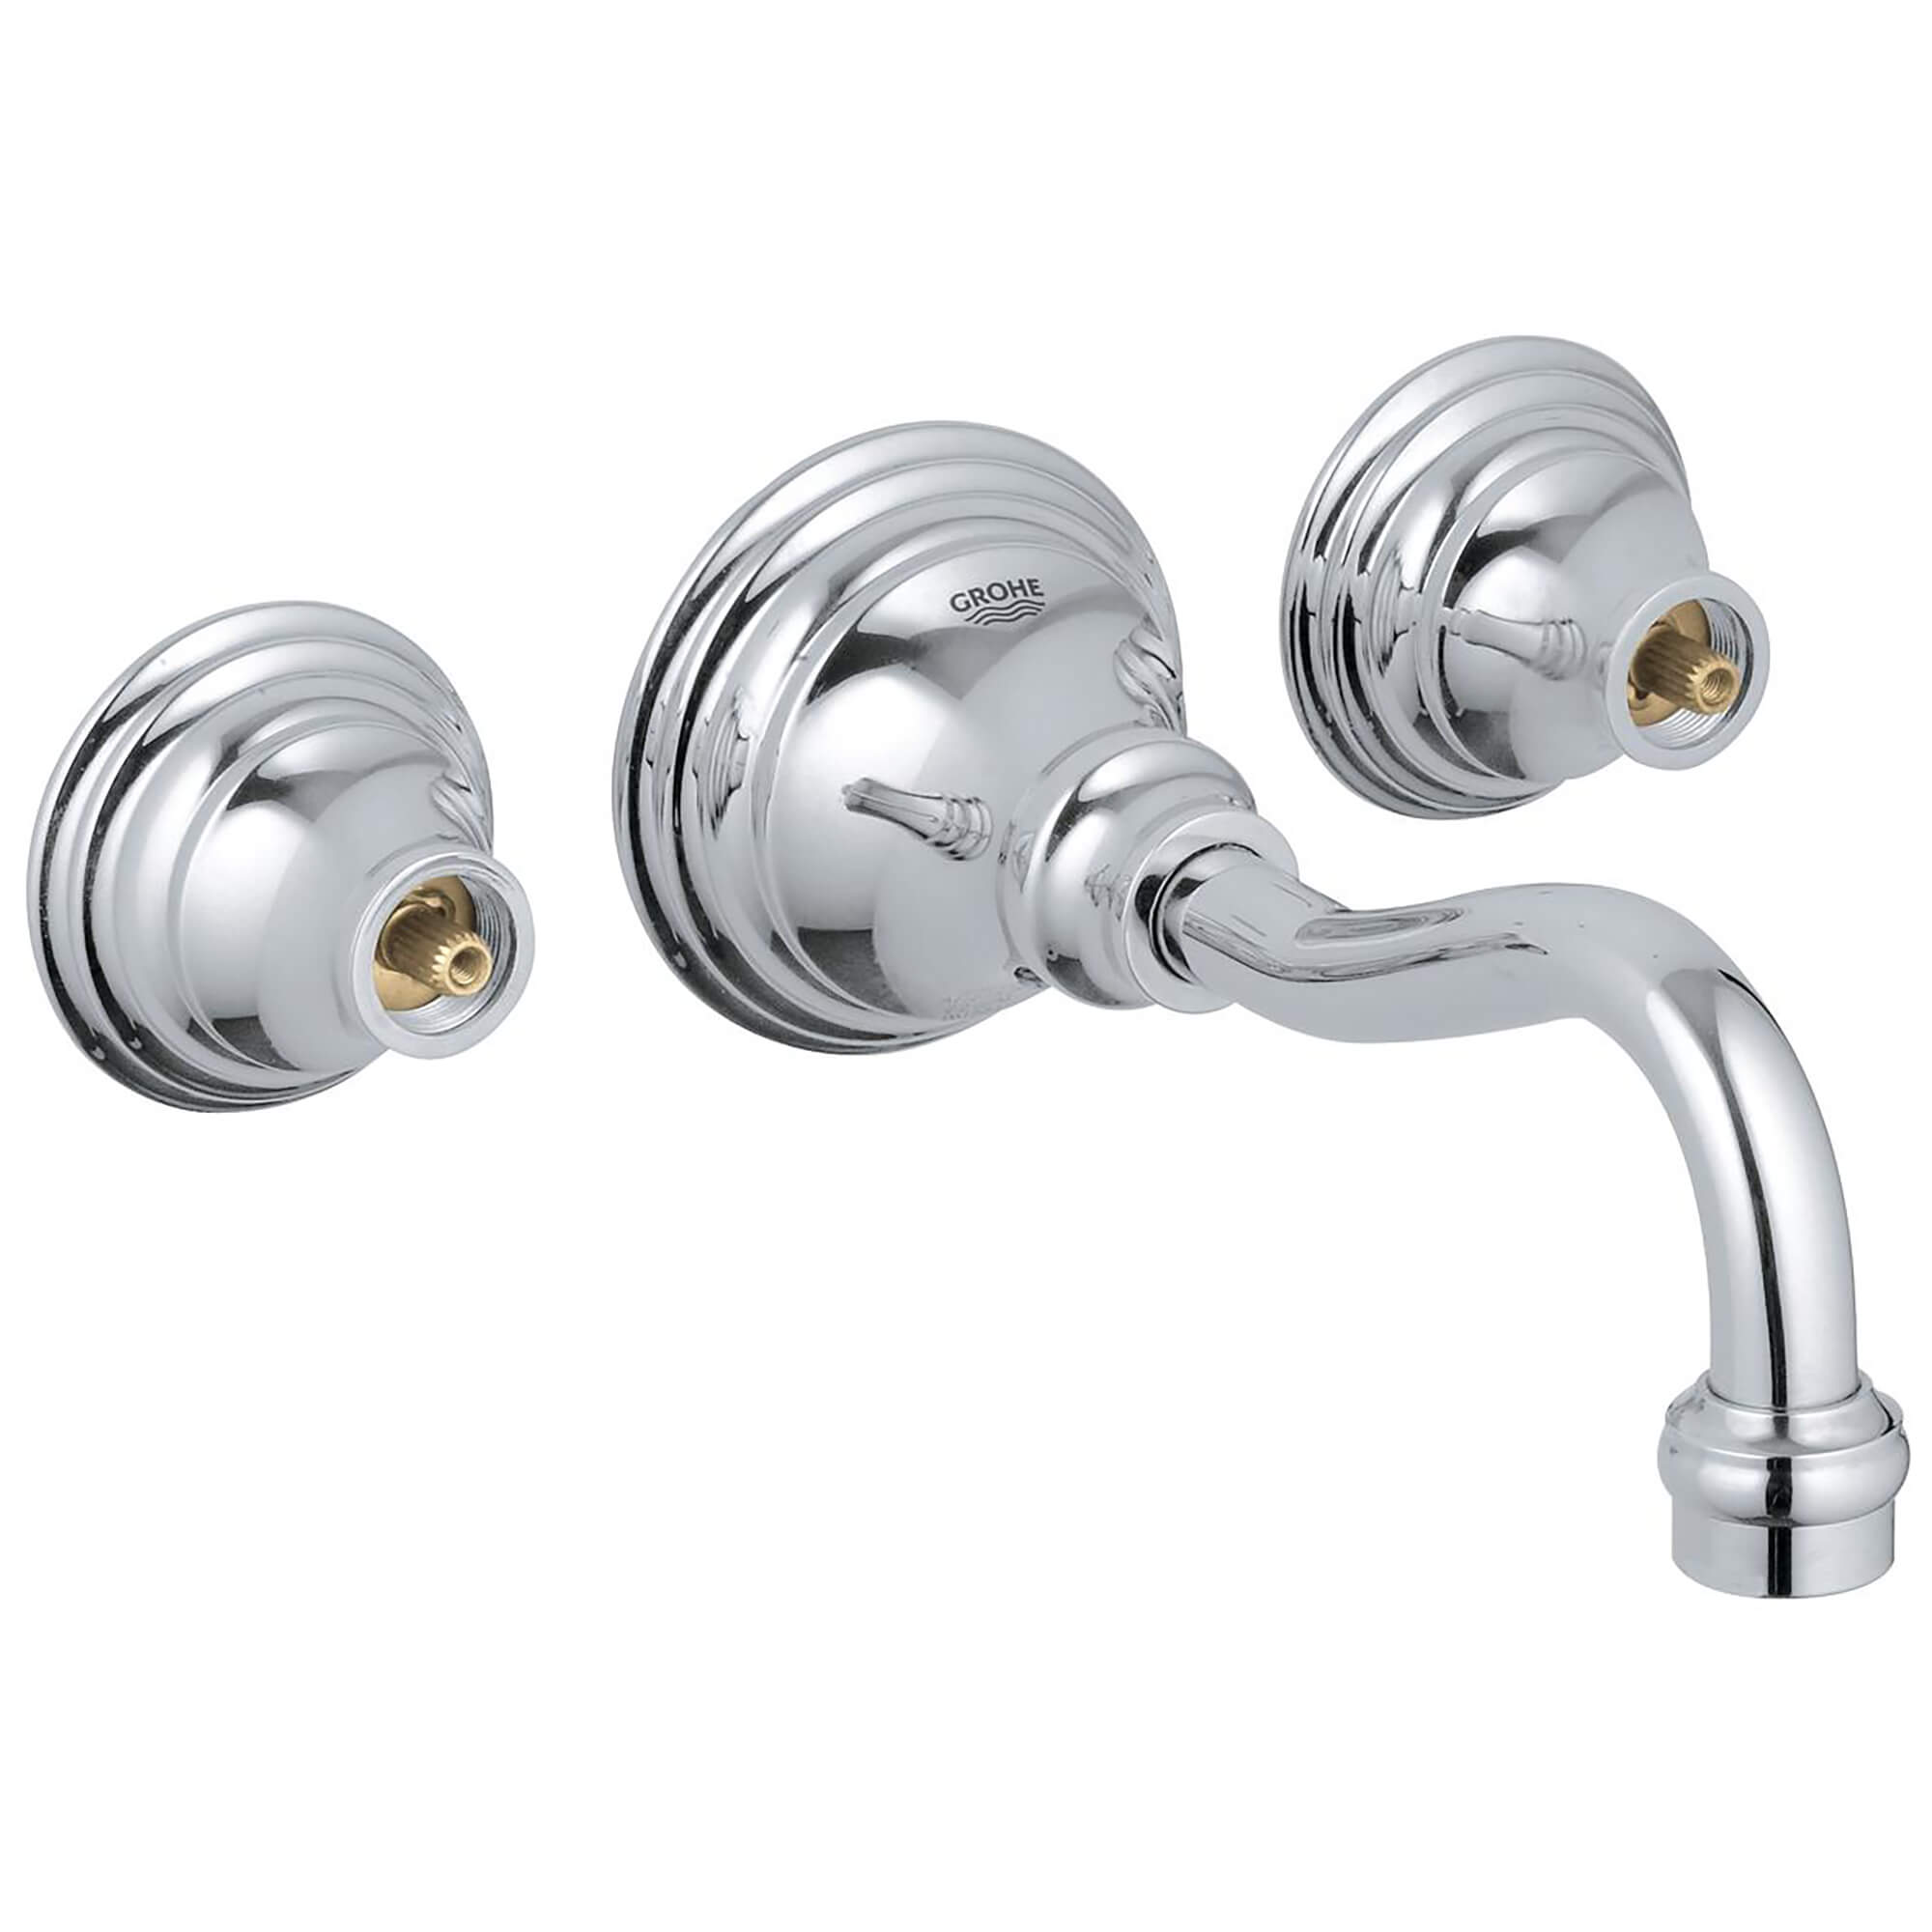 2-HANDLE WALL MOUNT FAUCET 1.5 GPM-related